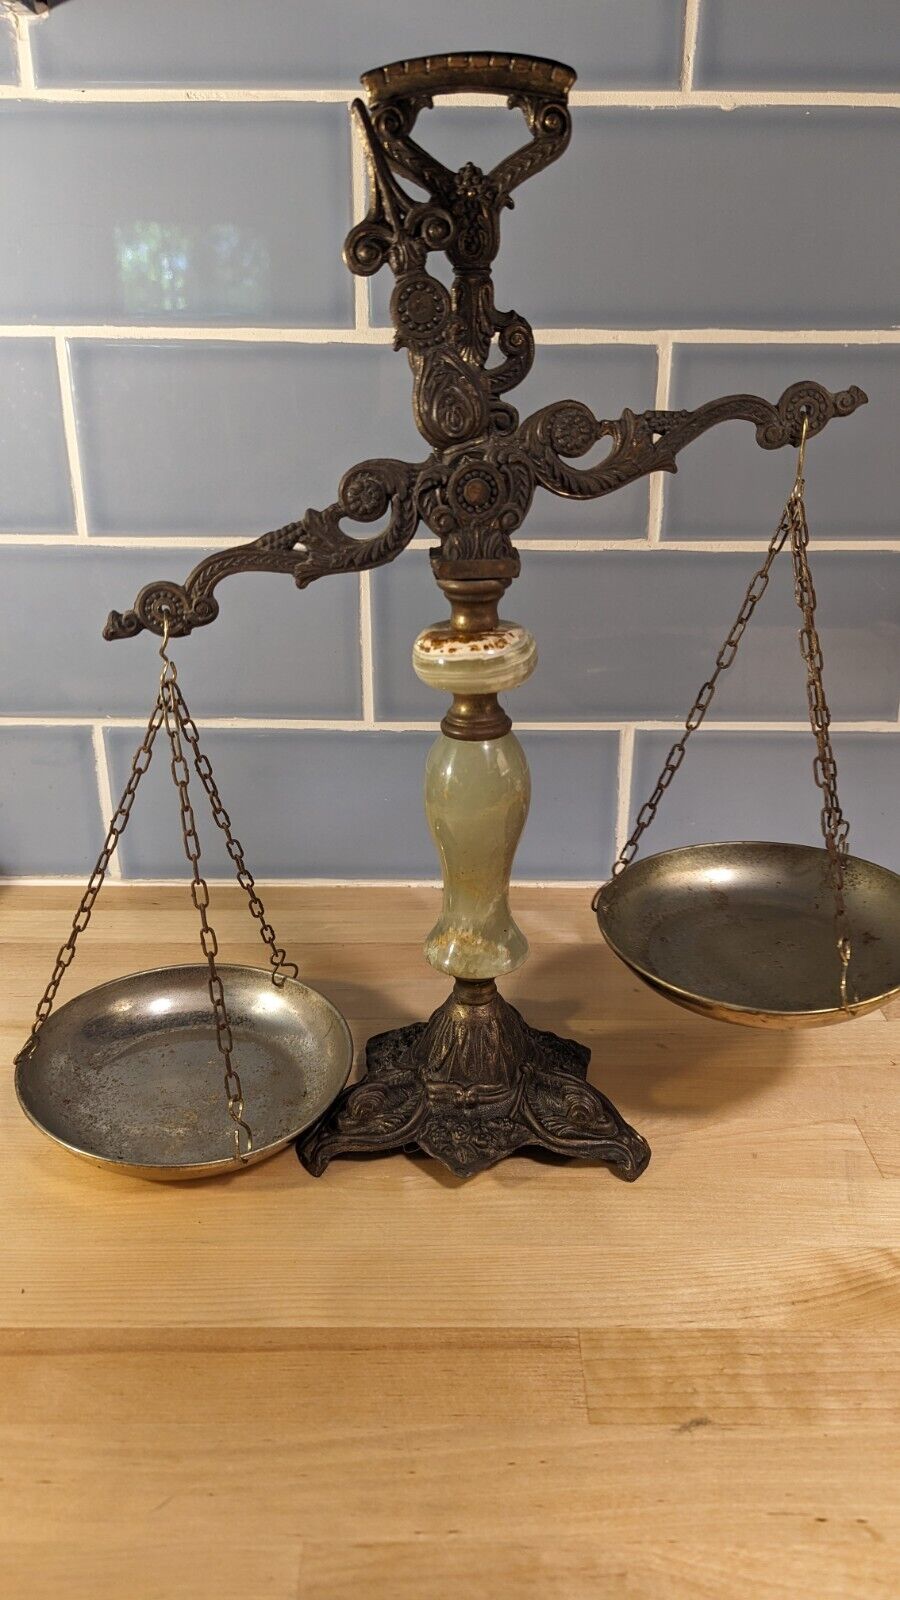 Family Heirloom: Vintage Italian Apothecary Scale with Green Marble Center